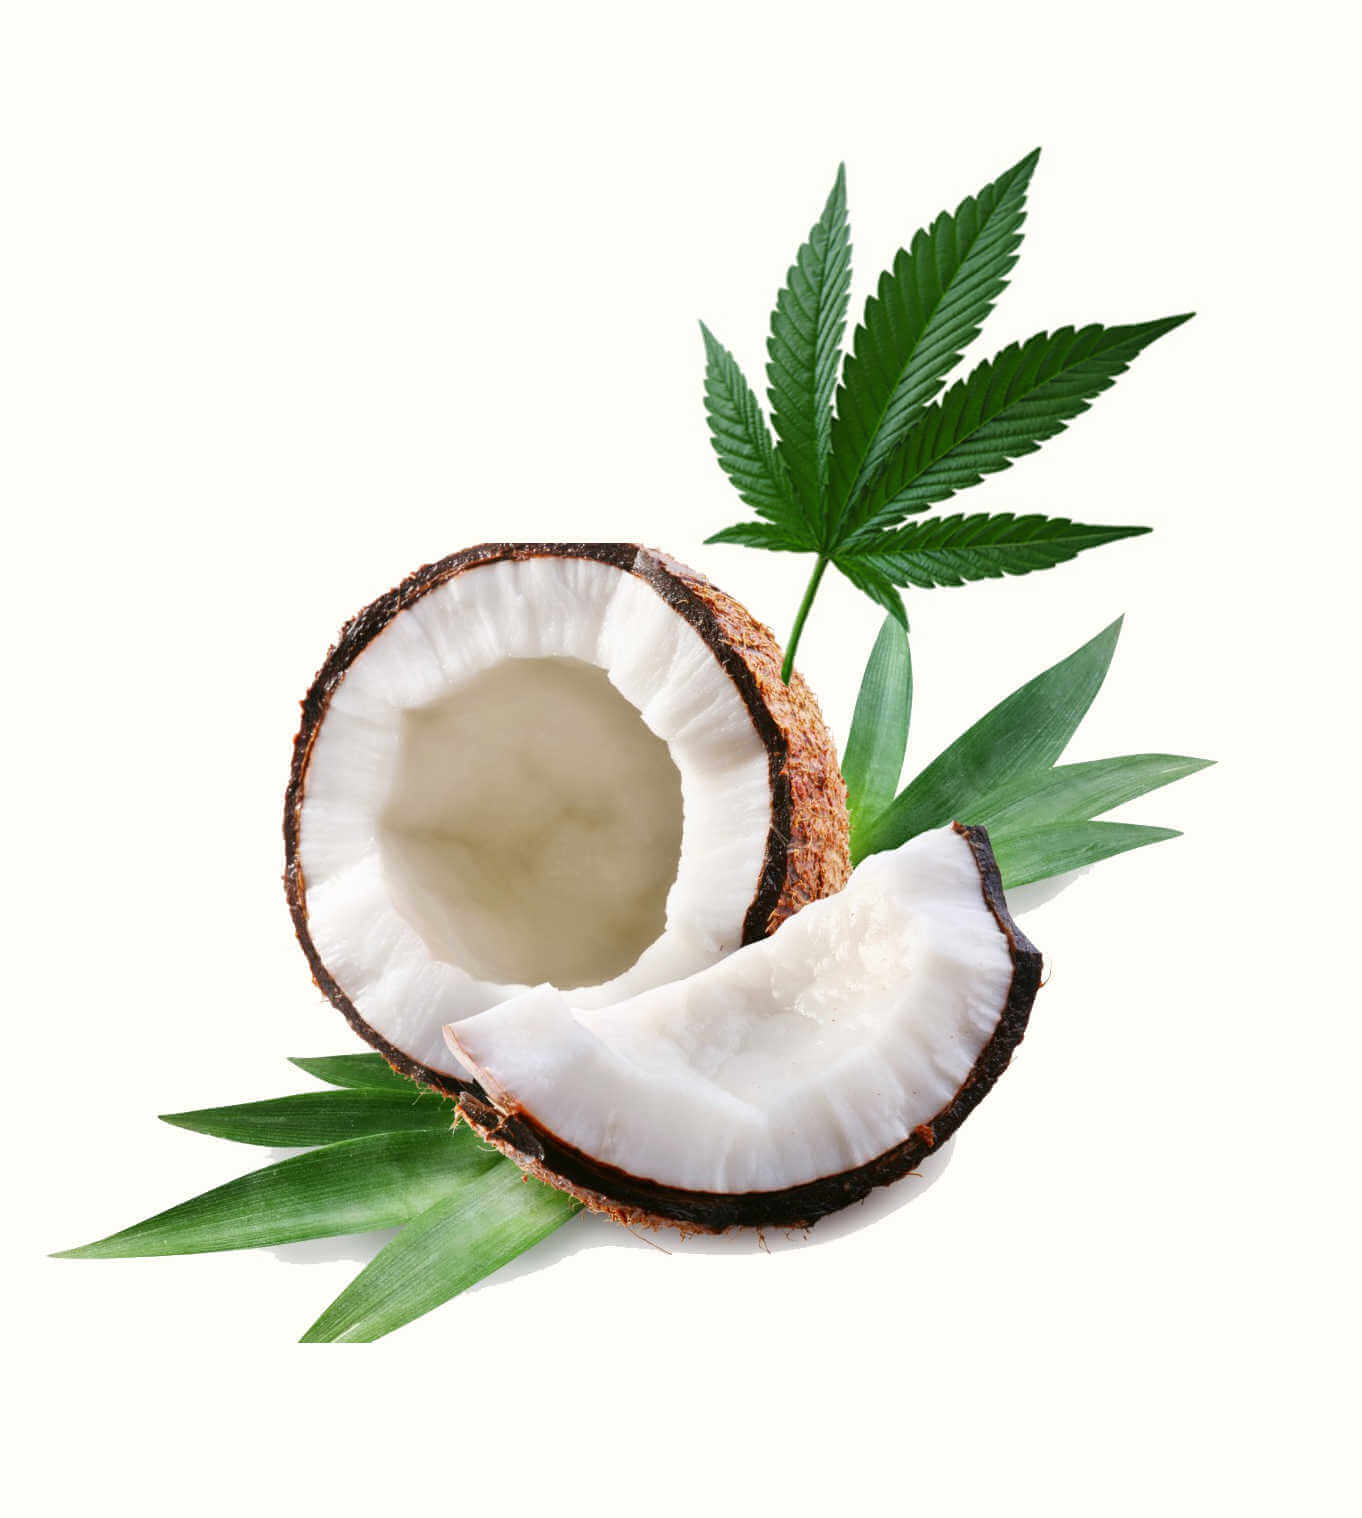 Cannabis and coconut oil image